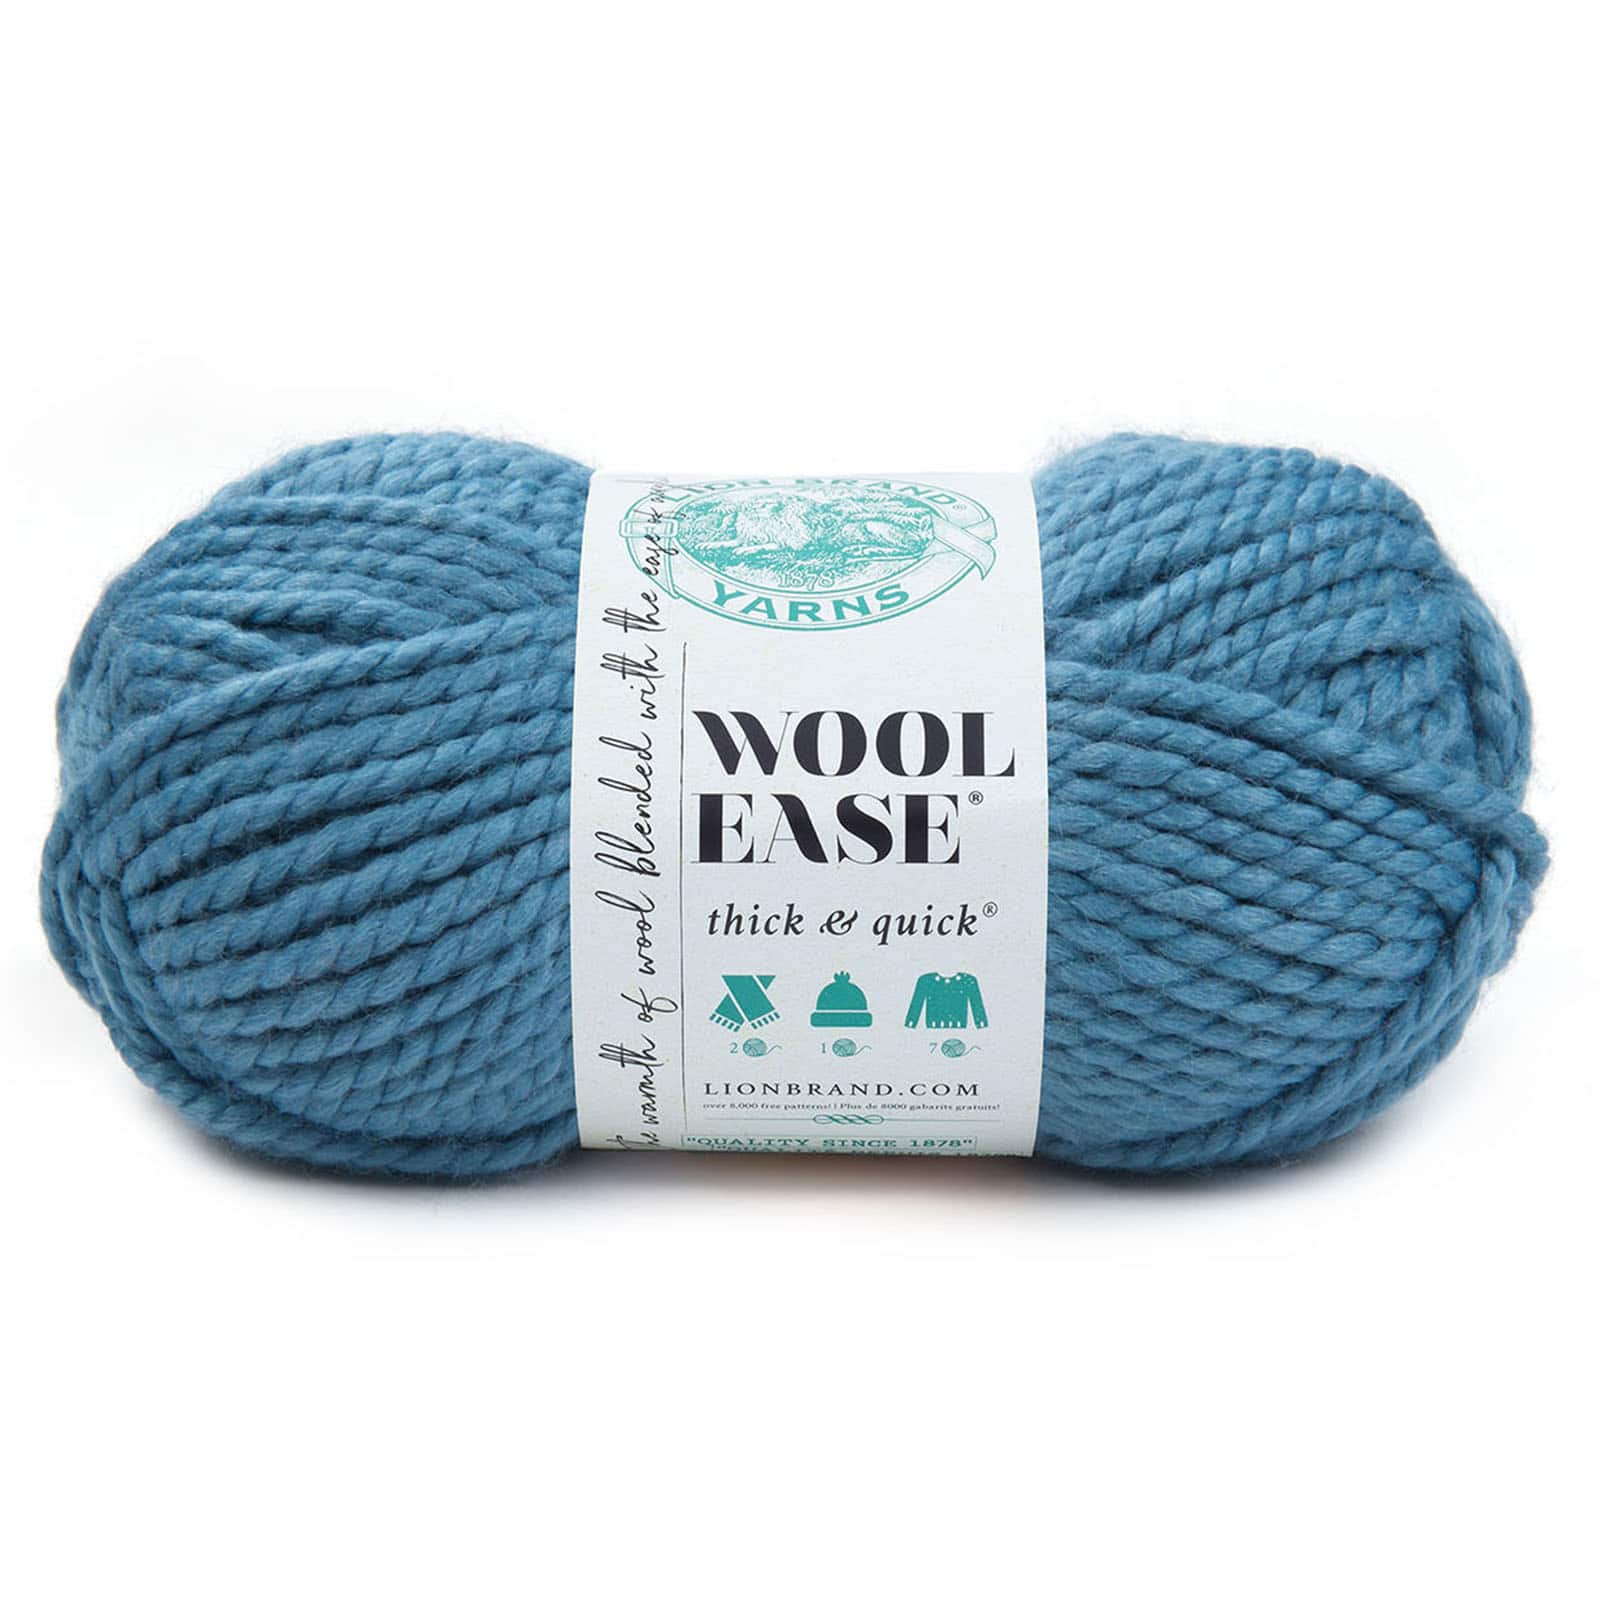 3 Pack) Lion Brand Yarn 640-402 Wool-Ease Thick & Quick Bulky Yarn